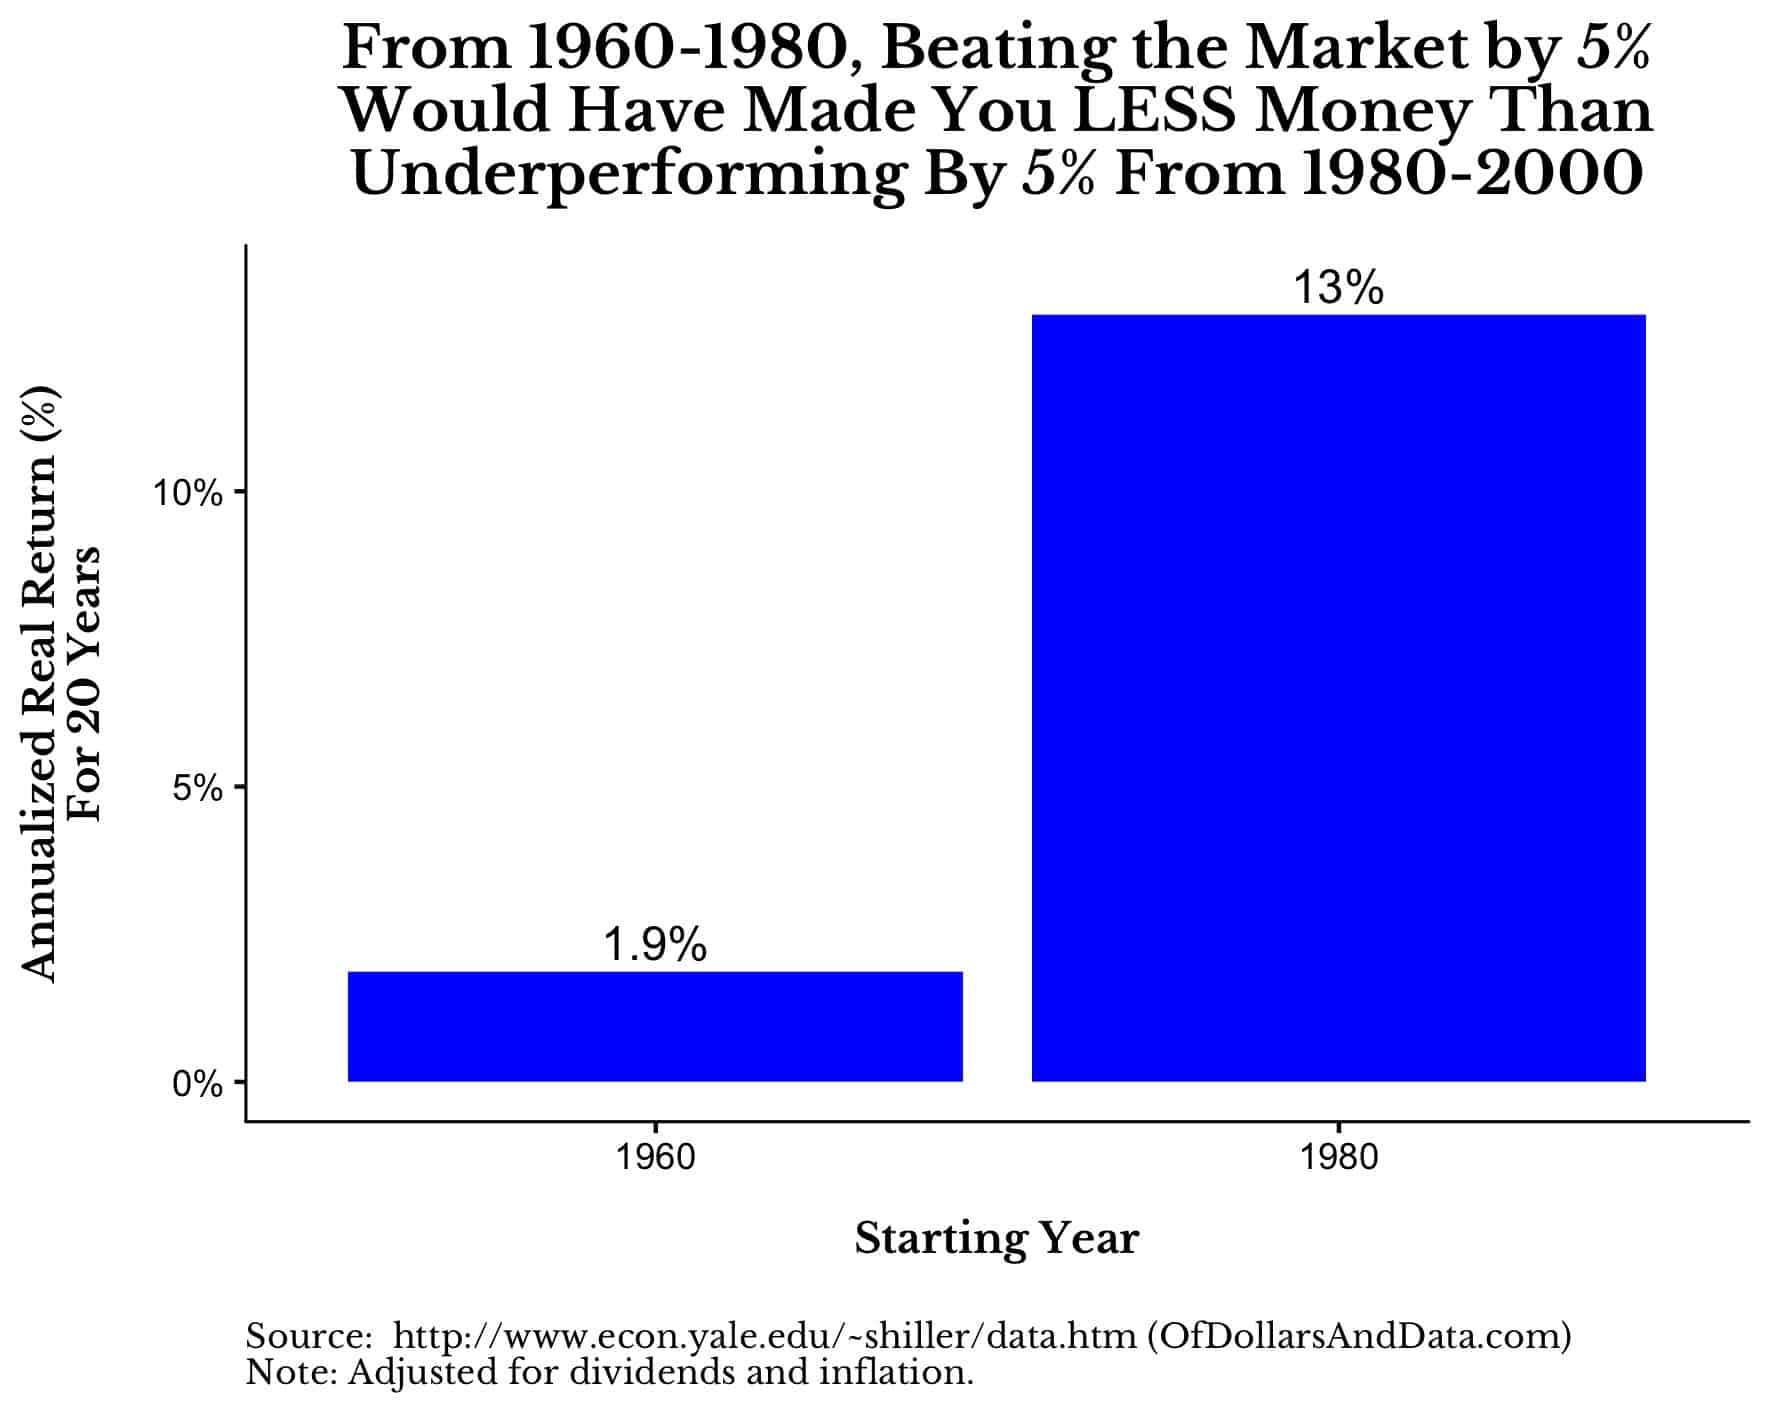 Chart showing that you would have made more money by underperforming the US stock market by 5% per year from 1980-2000 than by beating the US stock market by 5% per year from 1960-1980.